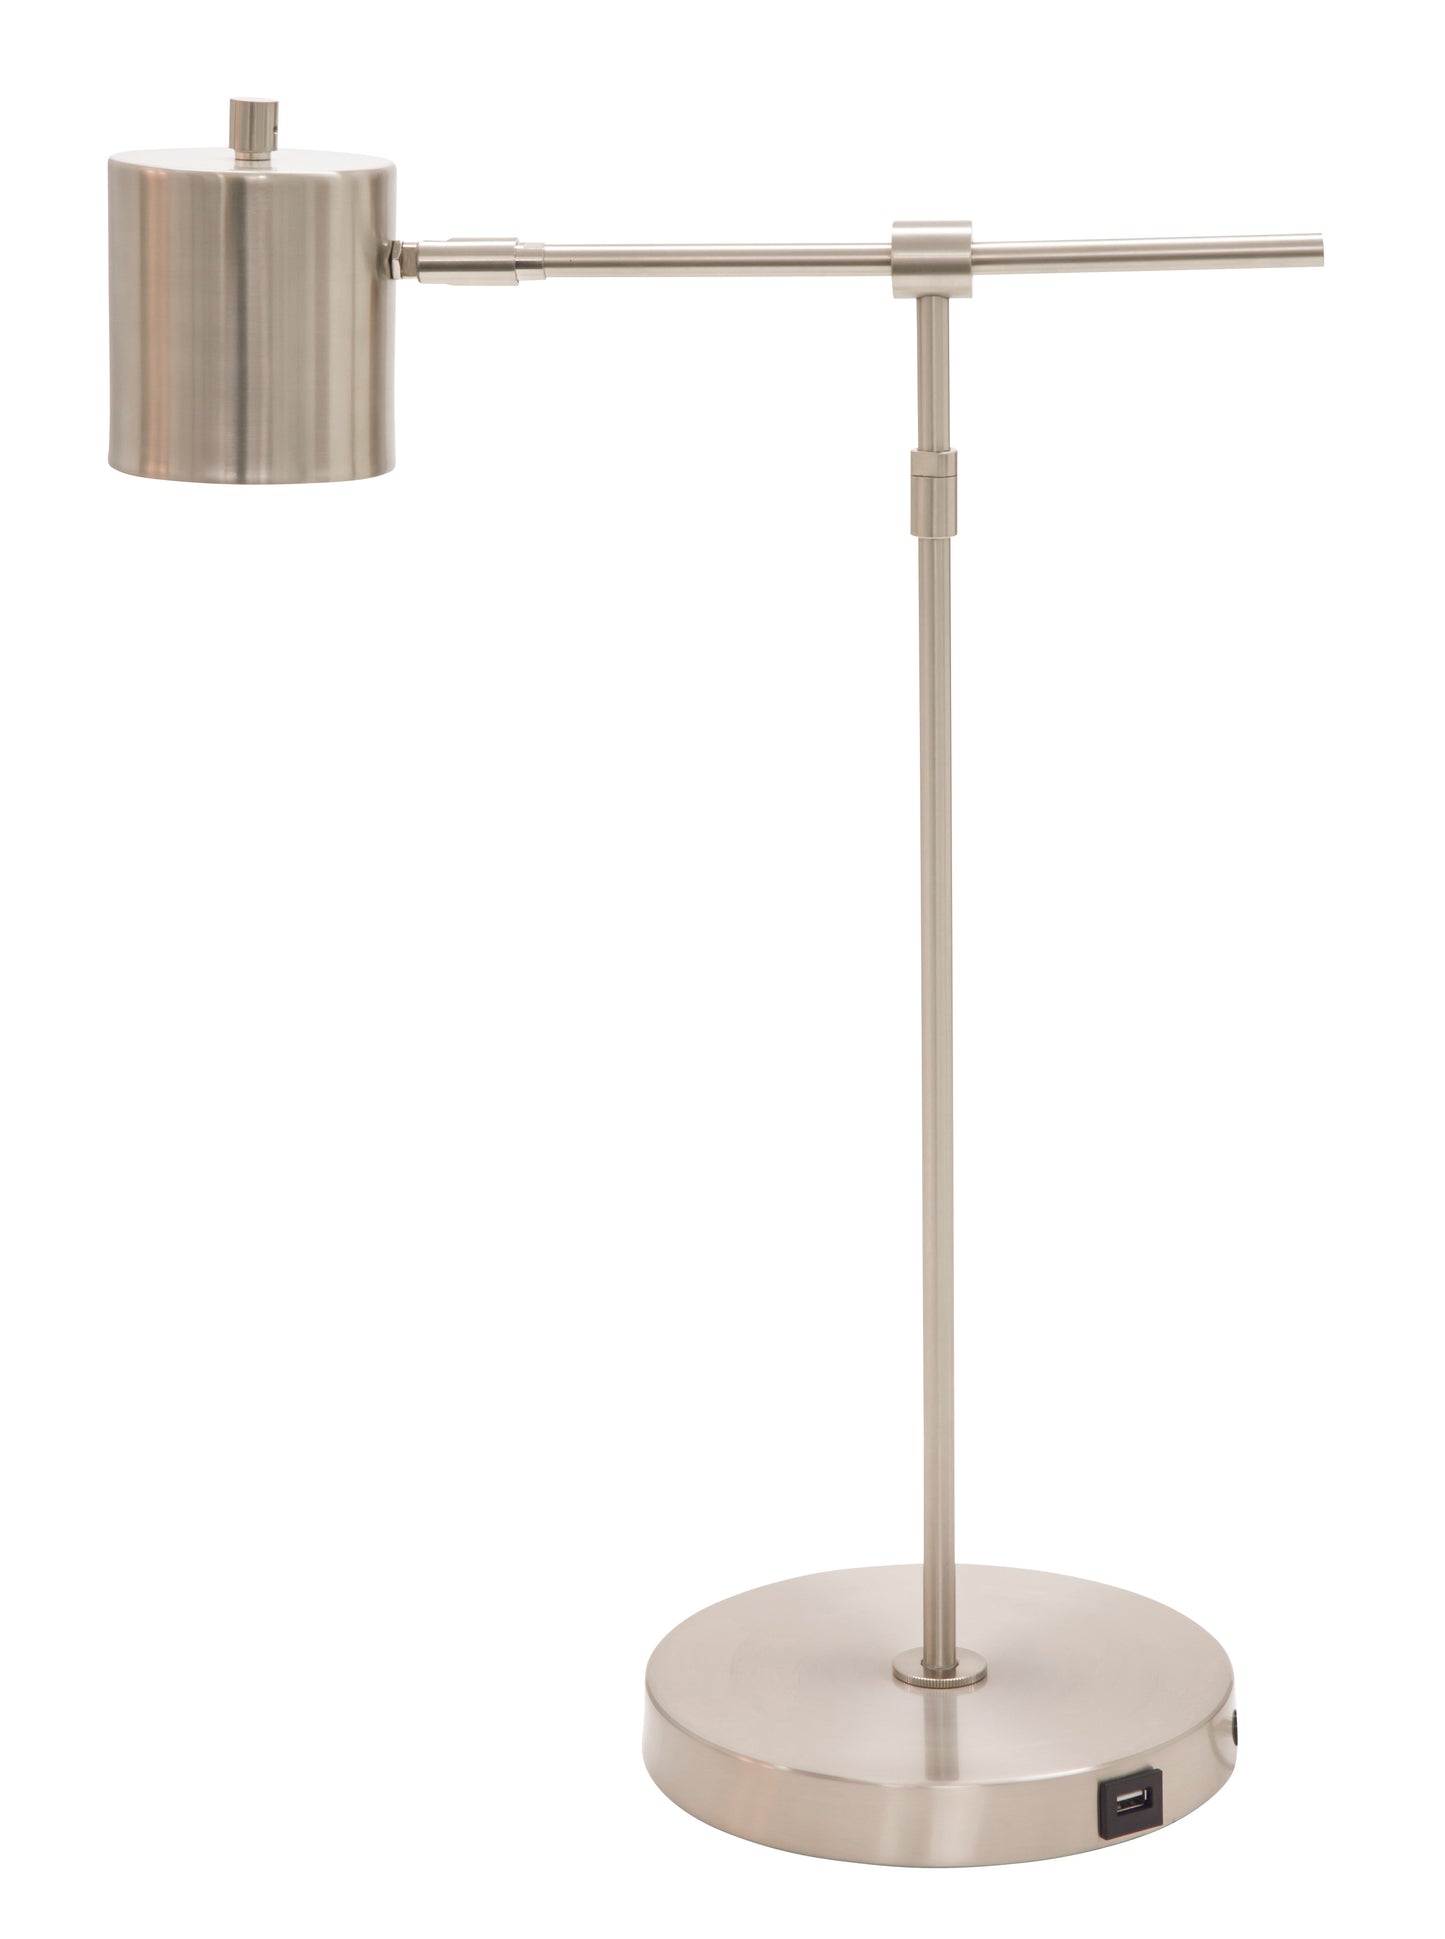 House of Troy Morris Adjustable LED Table Lamp with USB port in Satin Nickel MO250-SN